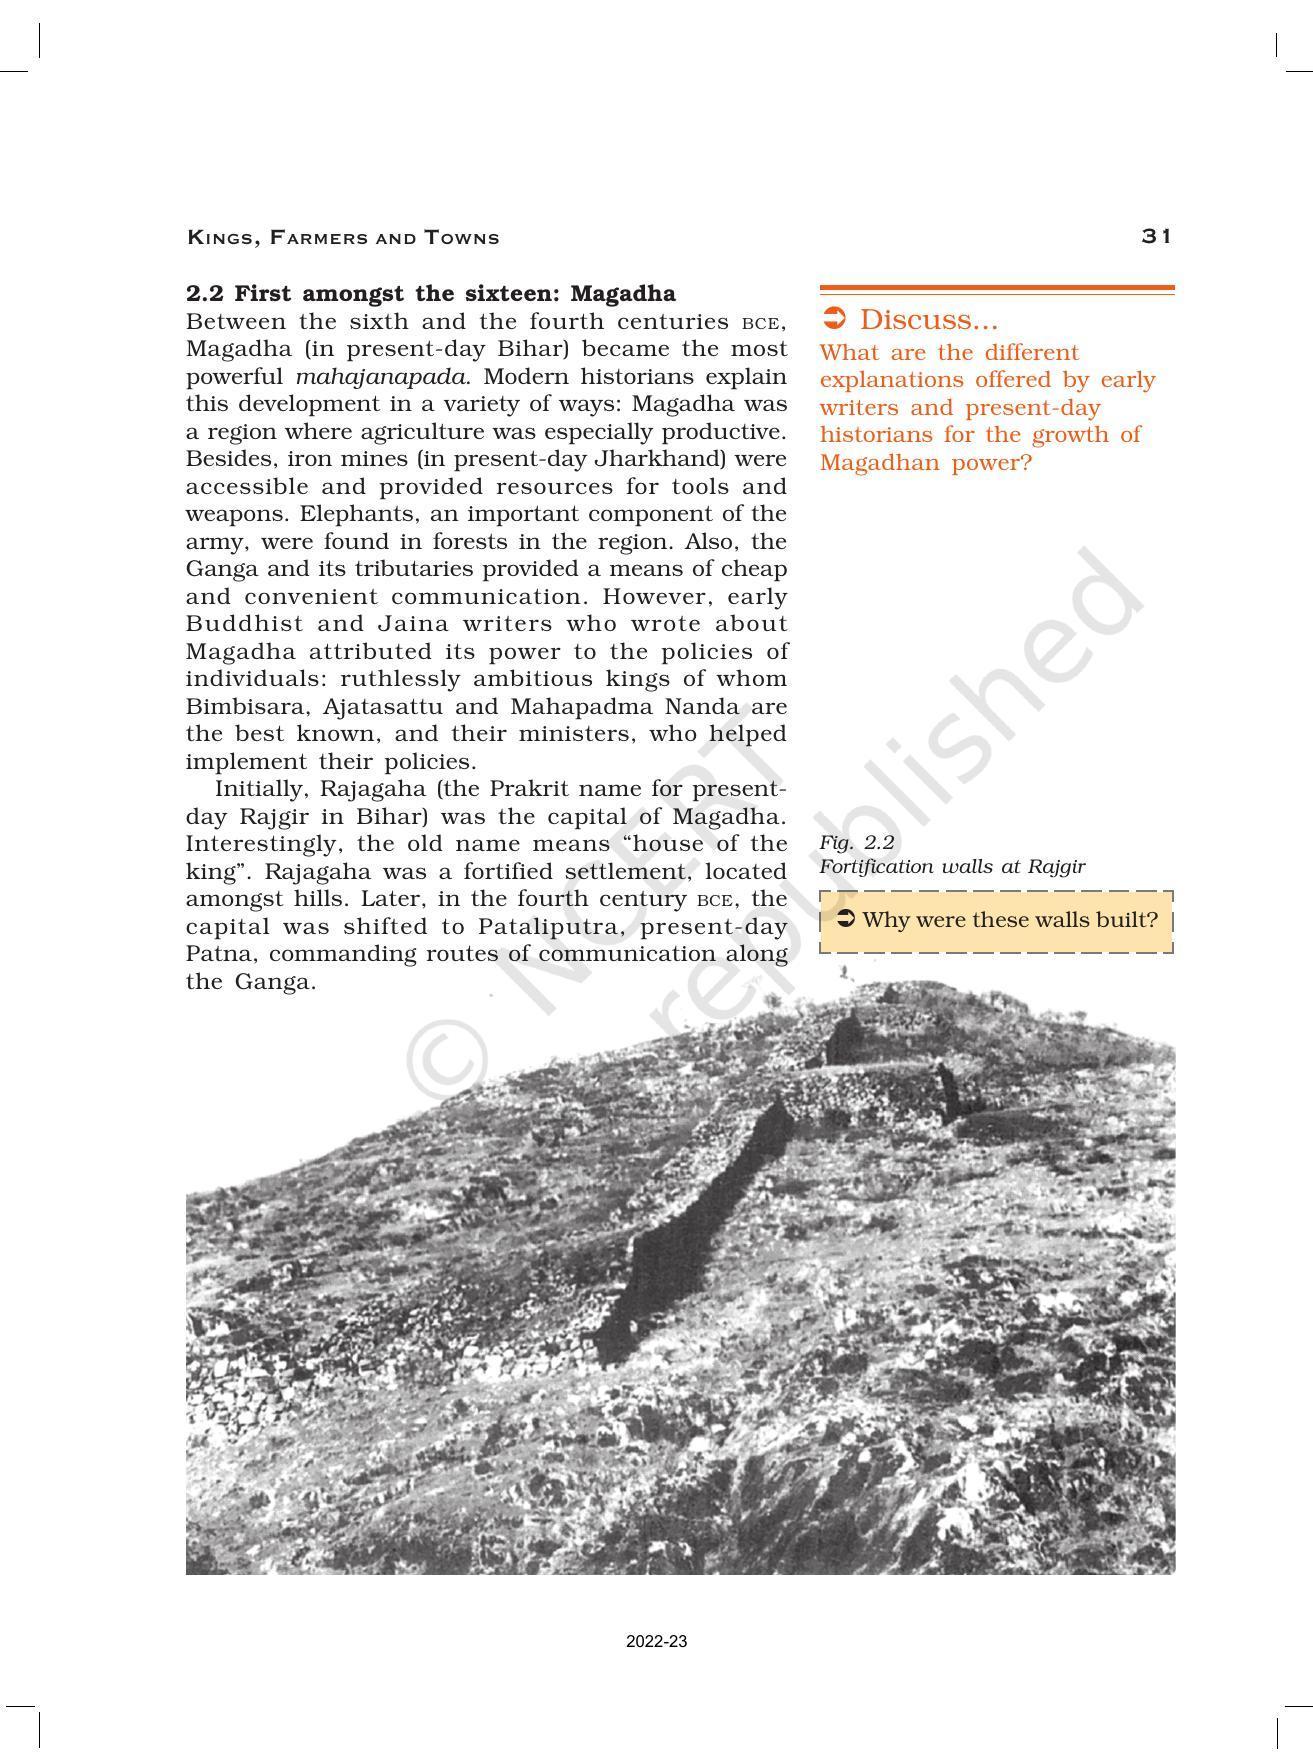 NCERT Book for Class 12 History (Part-1) Chapter 2 Kings, Farmers, and Towns - Page 4